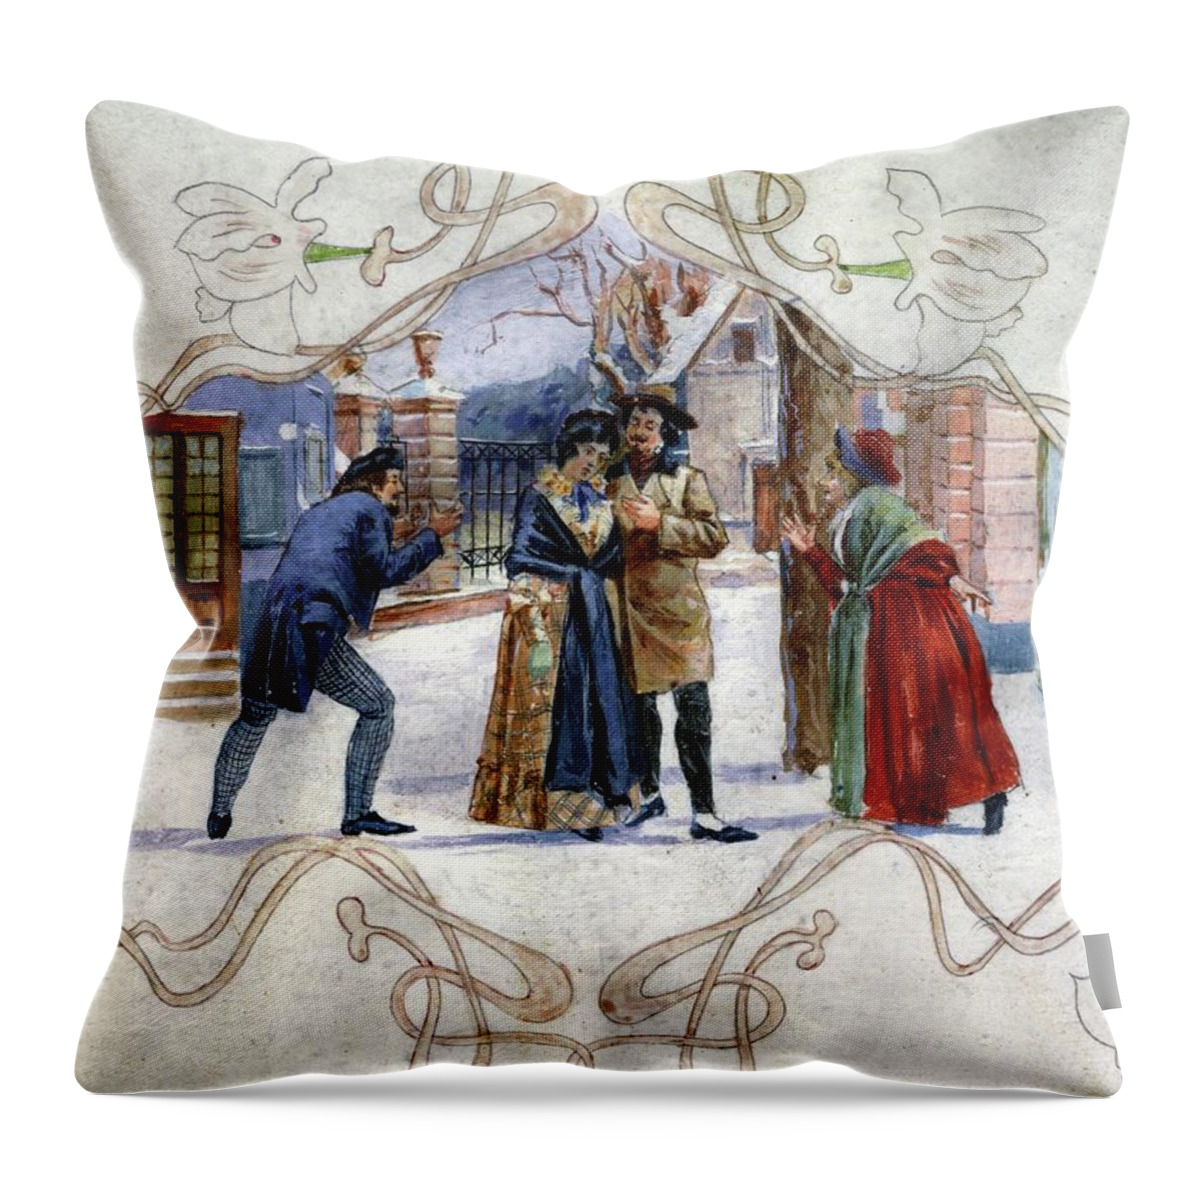 Giacomo Puccini Throw Pillow featuring the painting Watercolour scene from opera 'La Boheme' by G. Puccini 1900. by Album